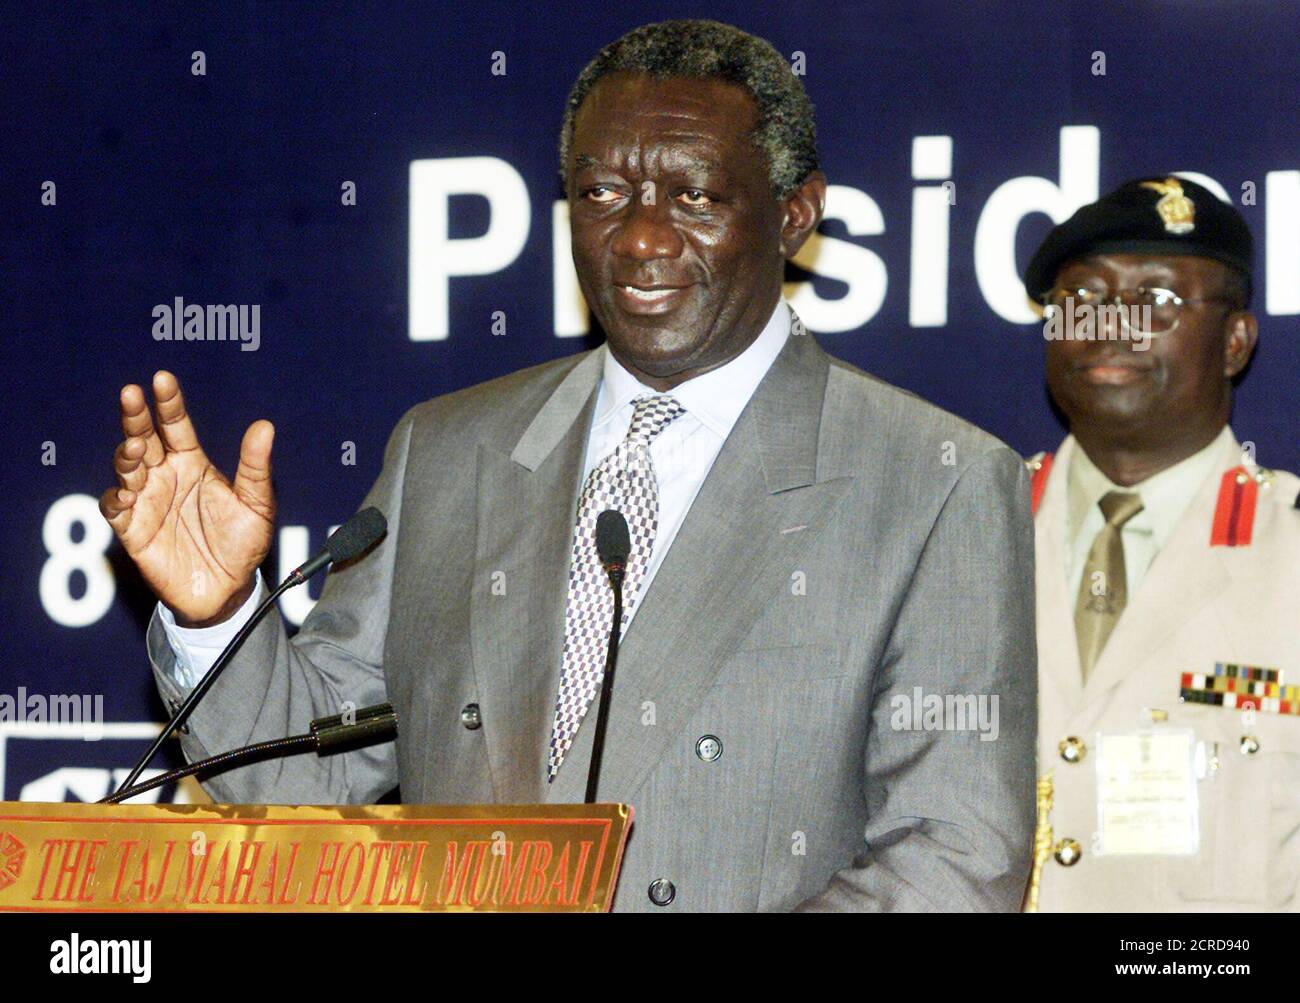 President of Ghana, John Agyekum Kufuor (L) speaks to a gathering of Indian industrialists, as his bodyguard looks on during a meeting by the Confederation of Indian Industry (CII) in Bombay, August 8, 2002. Kufuor is on a six-day official visit to India to attract Indian investments to Ghana. REUTERS/Arko Datta  AD/JS Stock Photo